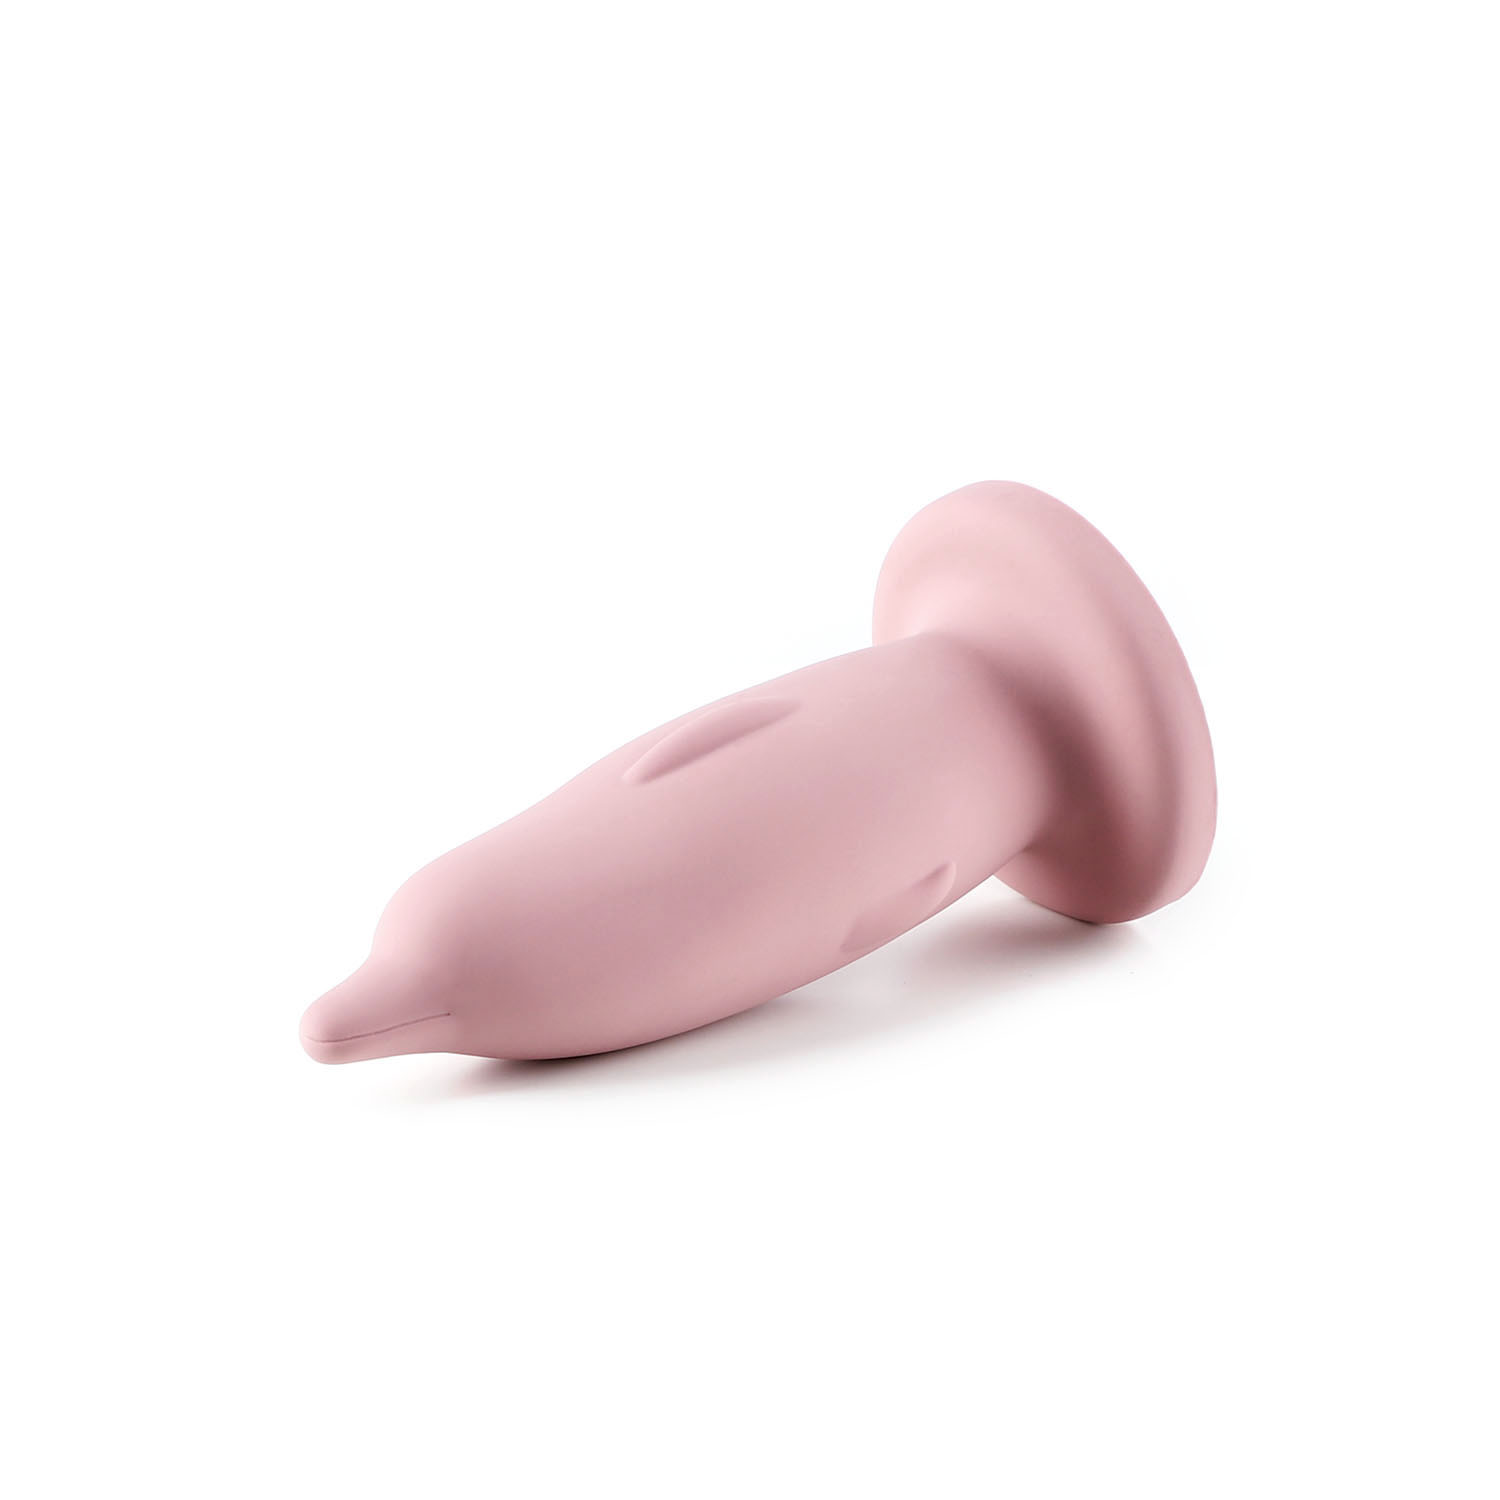 FANTASY DOLPHIN TEXTURED SILICONE DILDO ANAL PLAY IN PINK